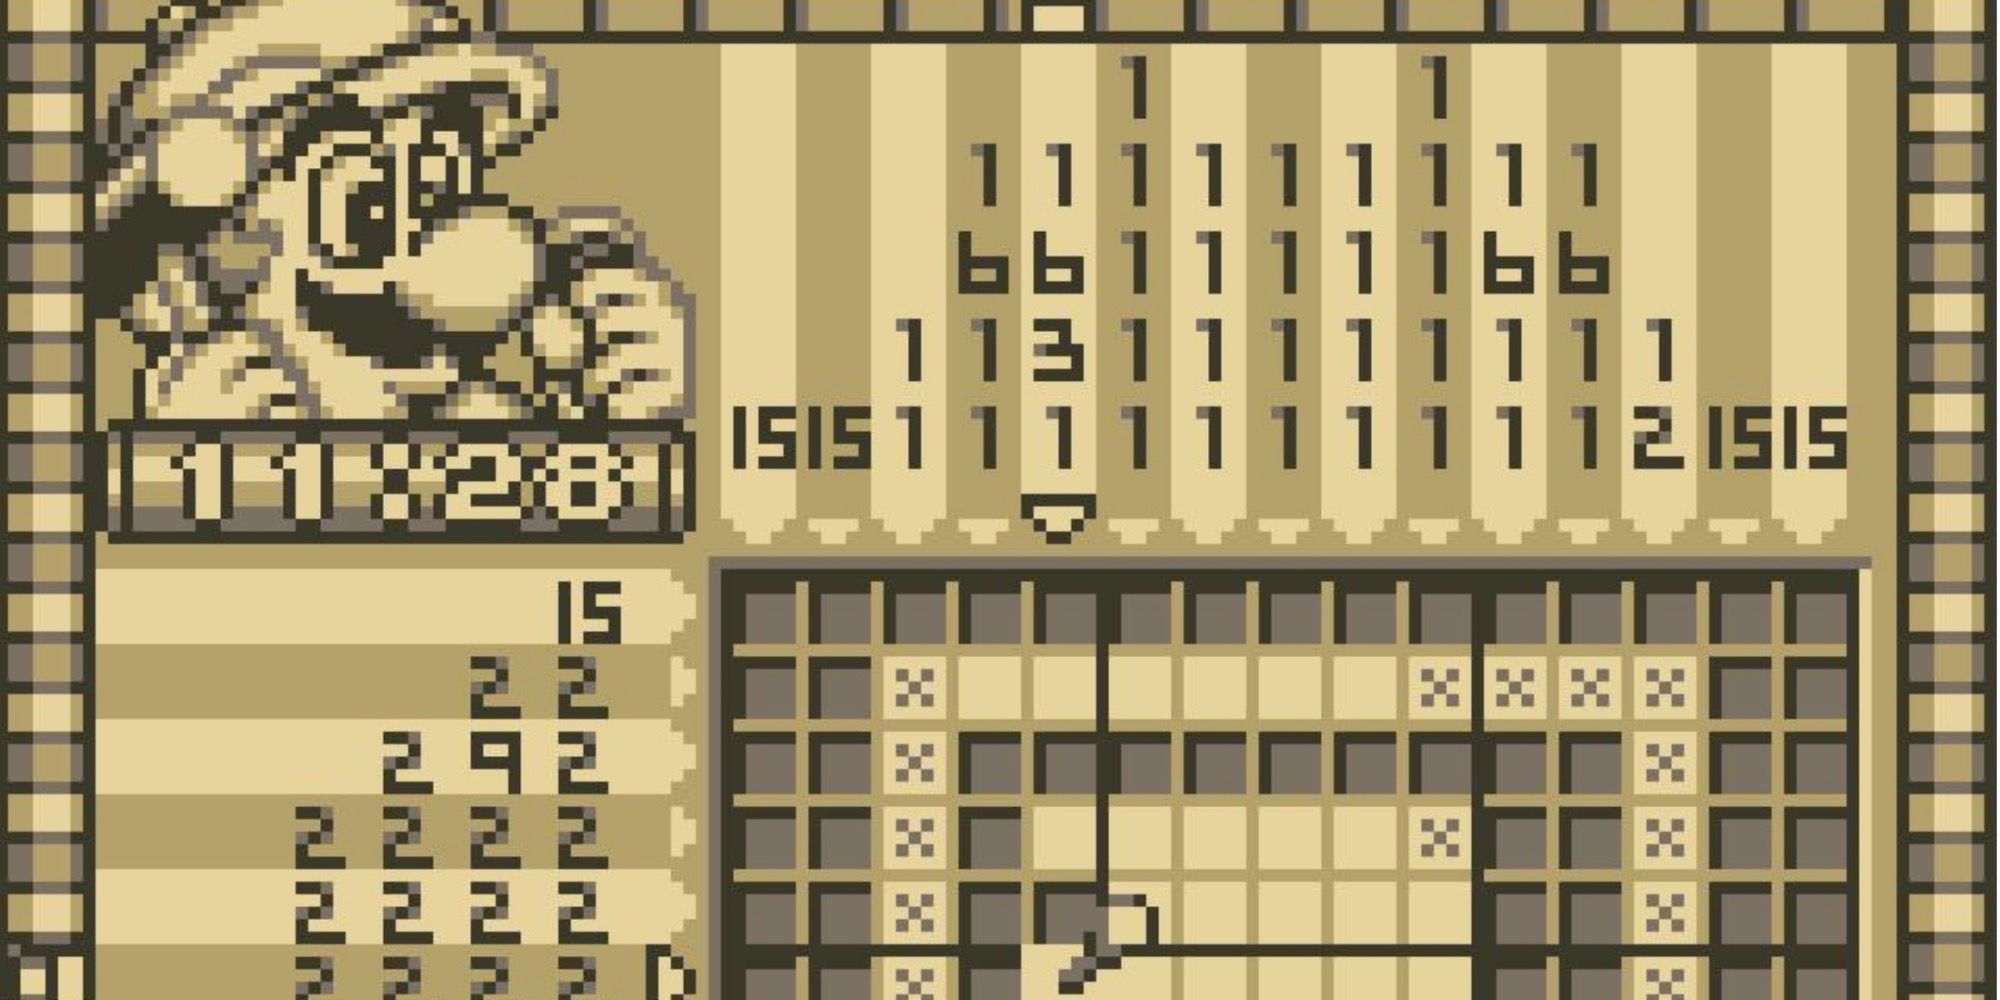 Playing a level in Mario’s Picross